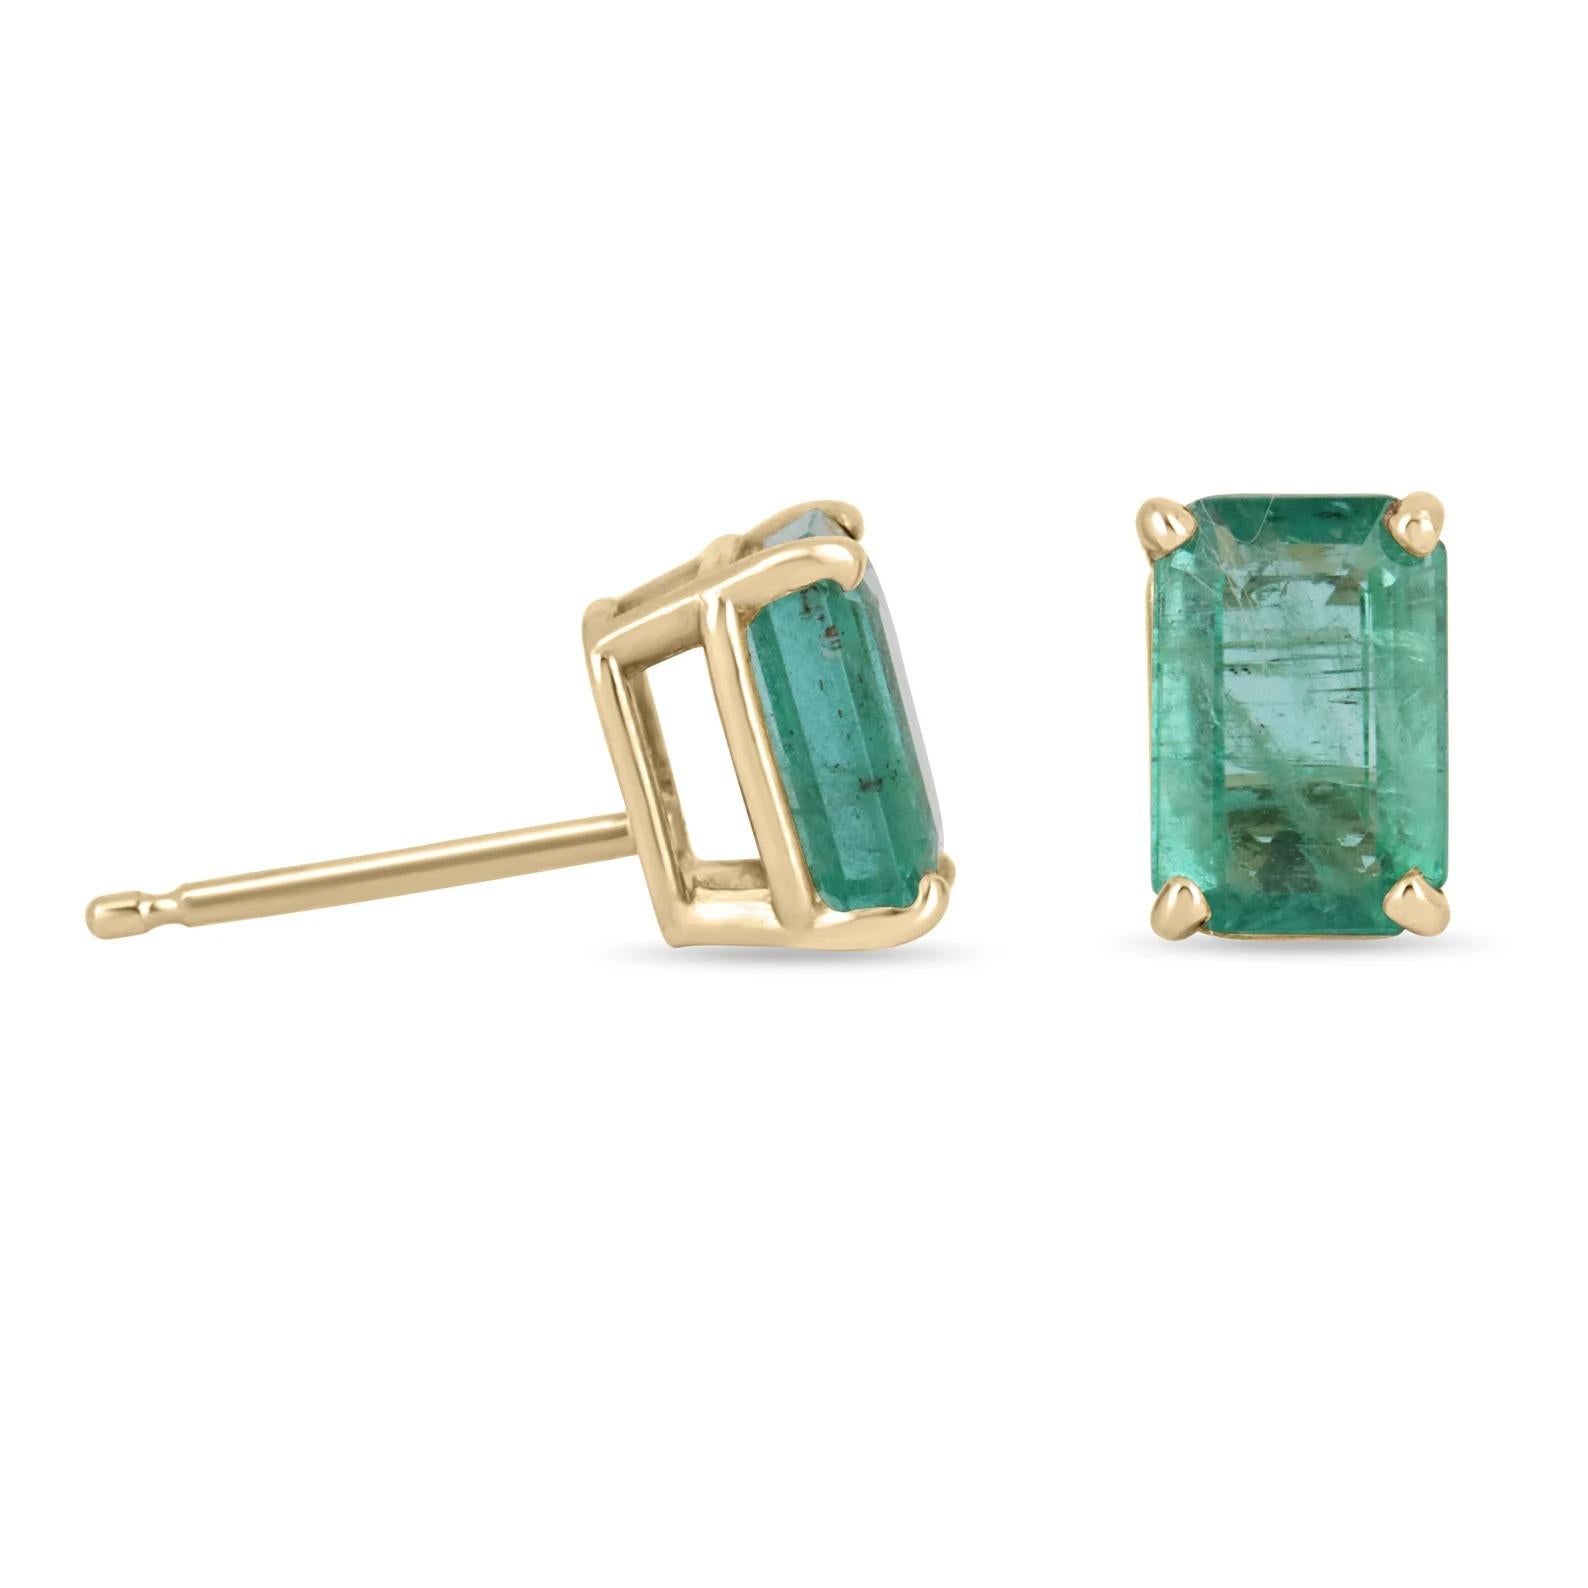 Featured here is a beautiful set of emerald cut emerald studs in fine 14K yellow gold. Displayed are dark green emeralds with very good transparency, accented by a simple four-prong 14K gold mount, allowing for the emerald to be shown in full view.